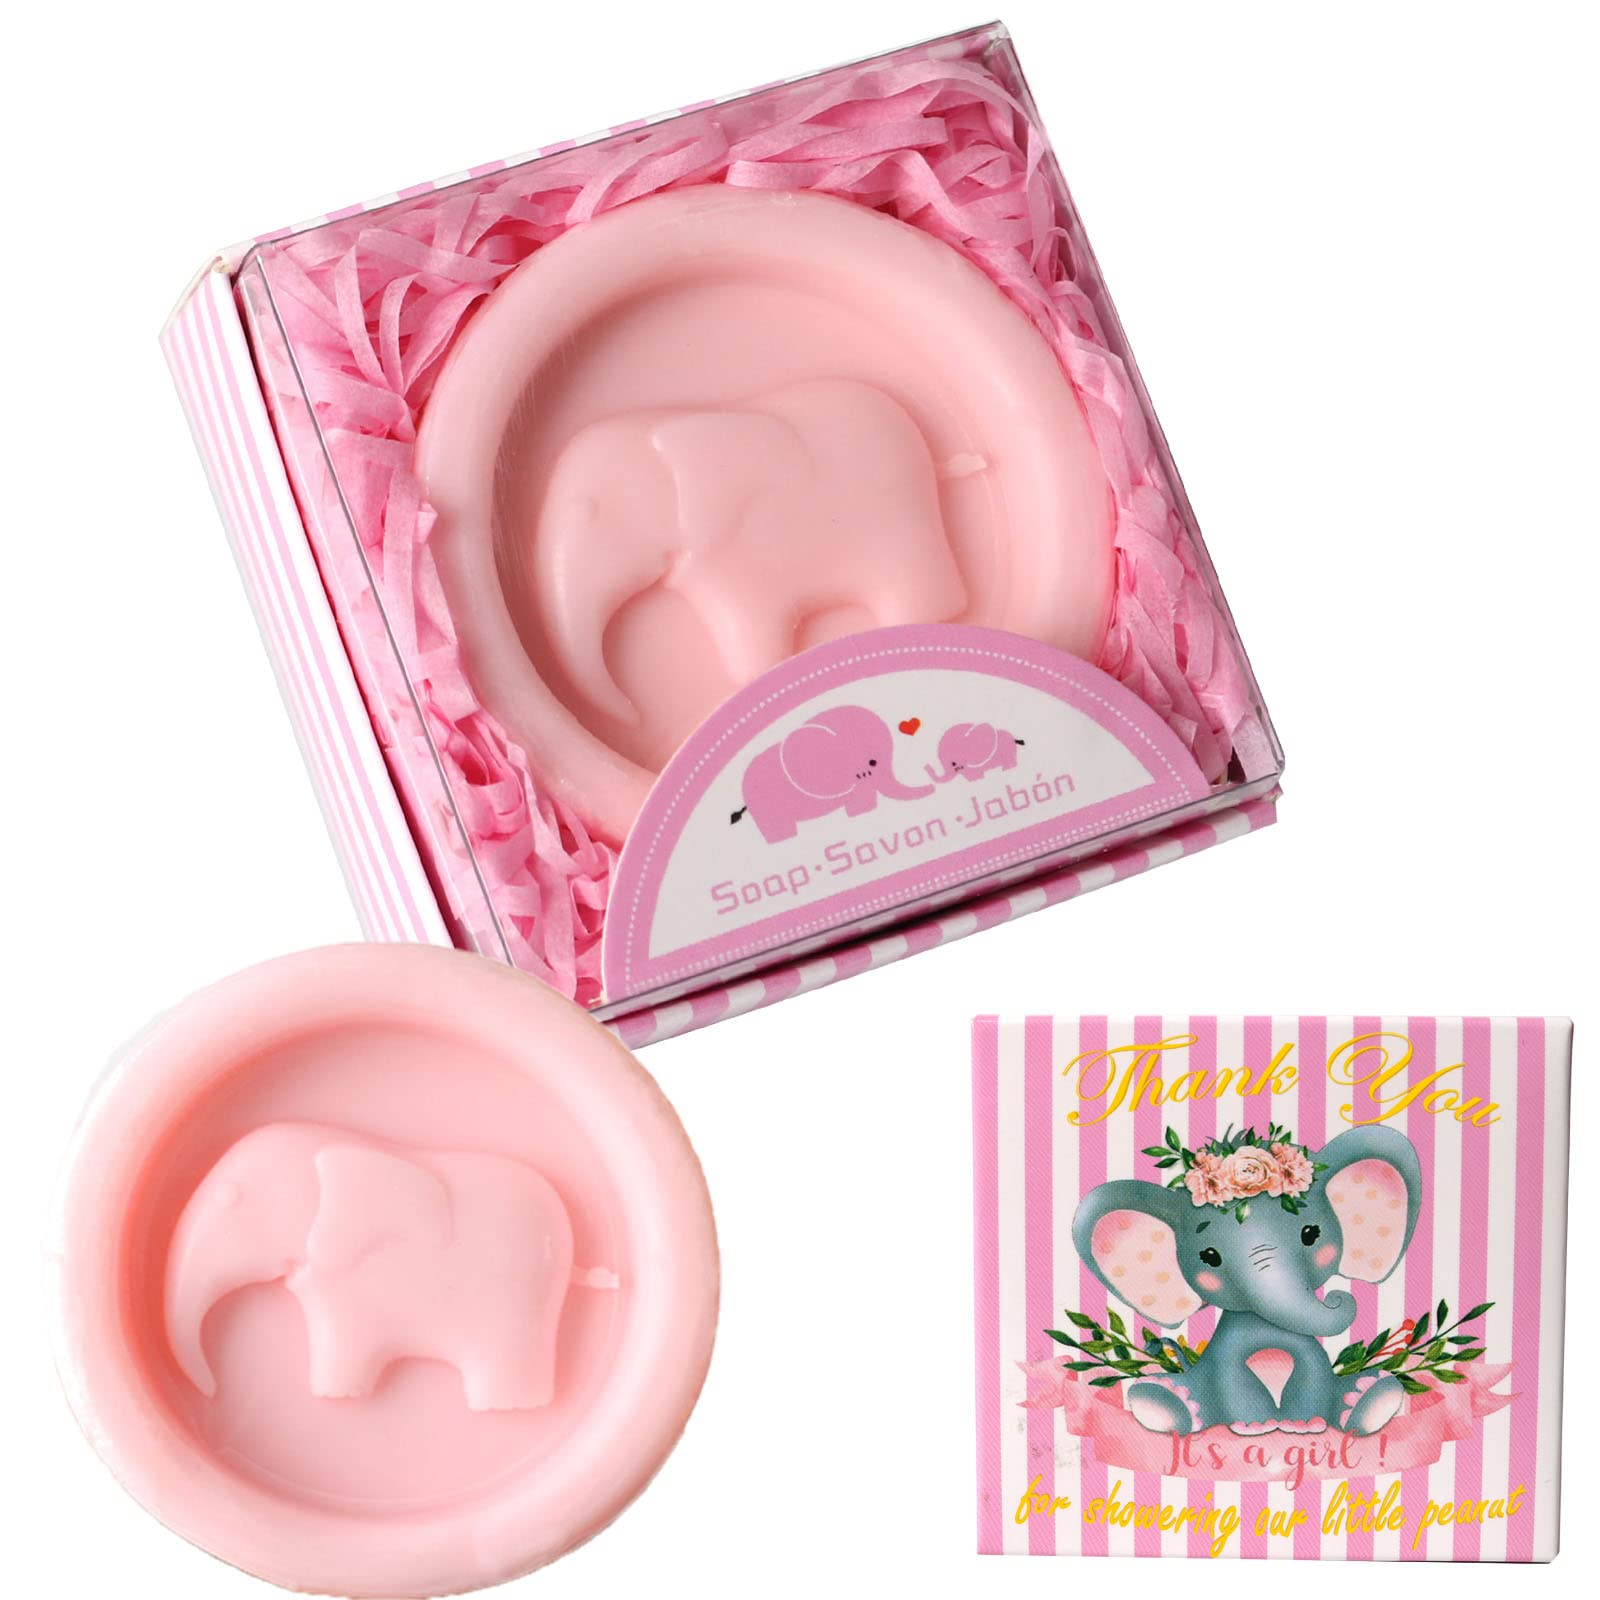 AIXIANg 24 Pack Little Elephant Style Soaps in Pink gift Packaging for Baby Shower Favors